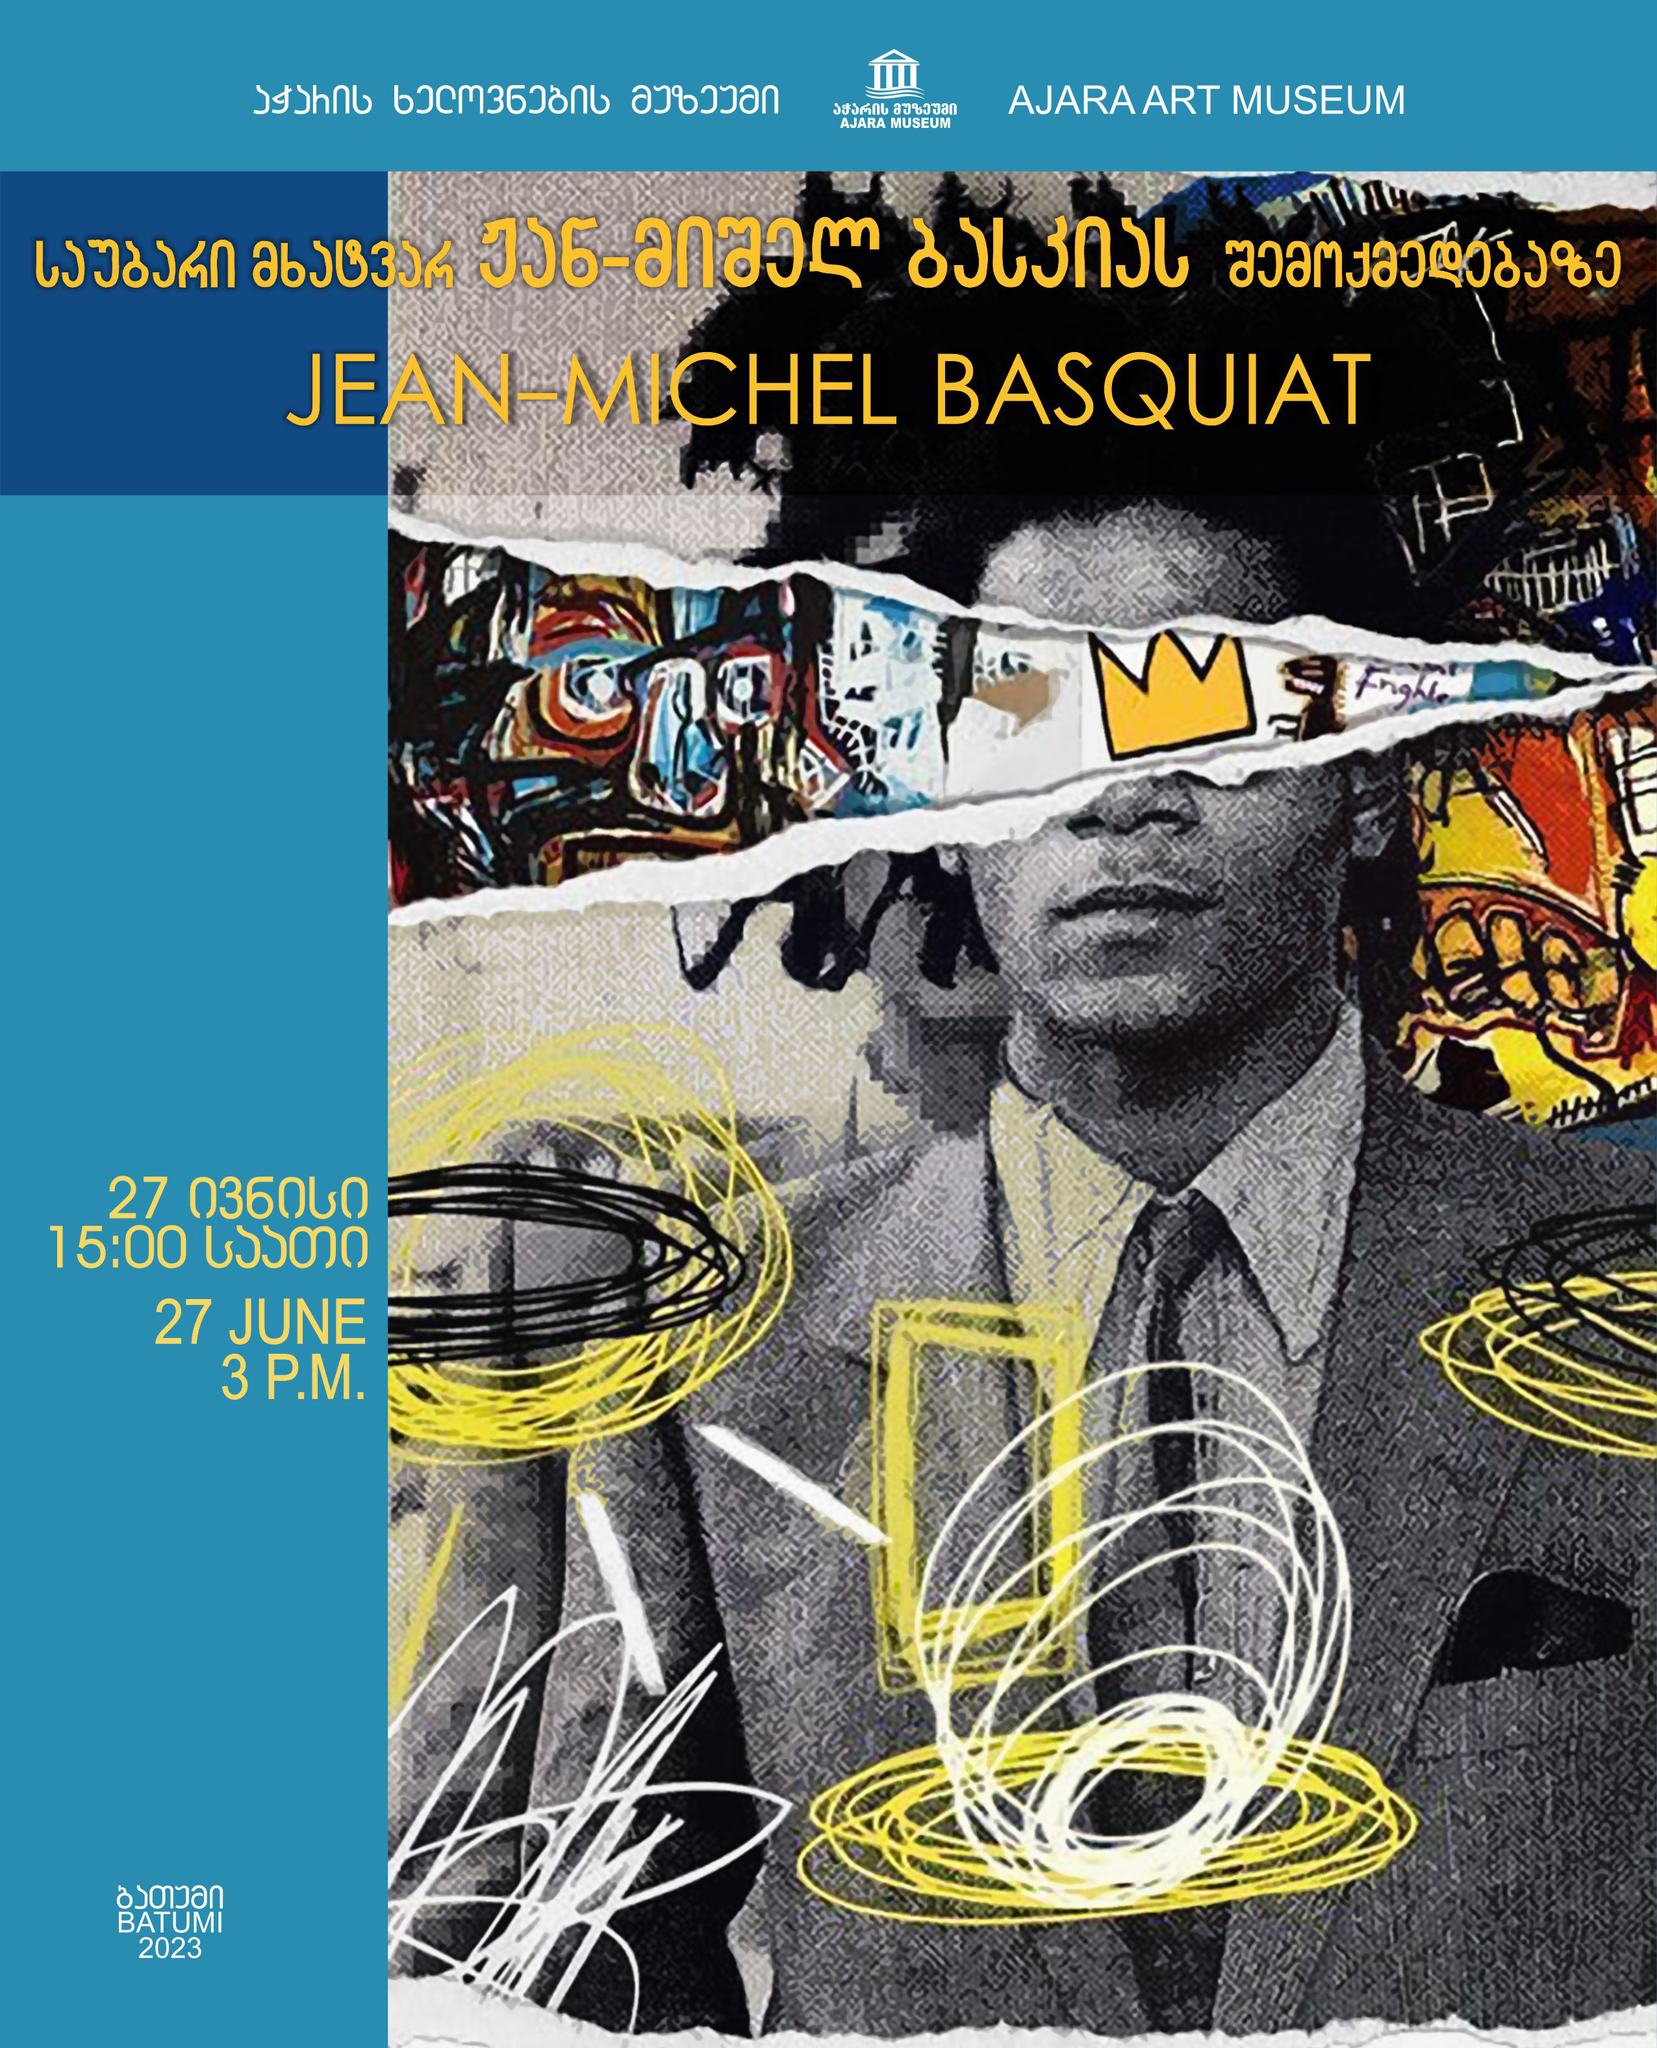 Talk about the life and work of American artist Jean-Michel Basquiat.